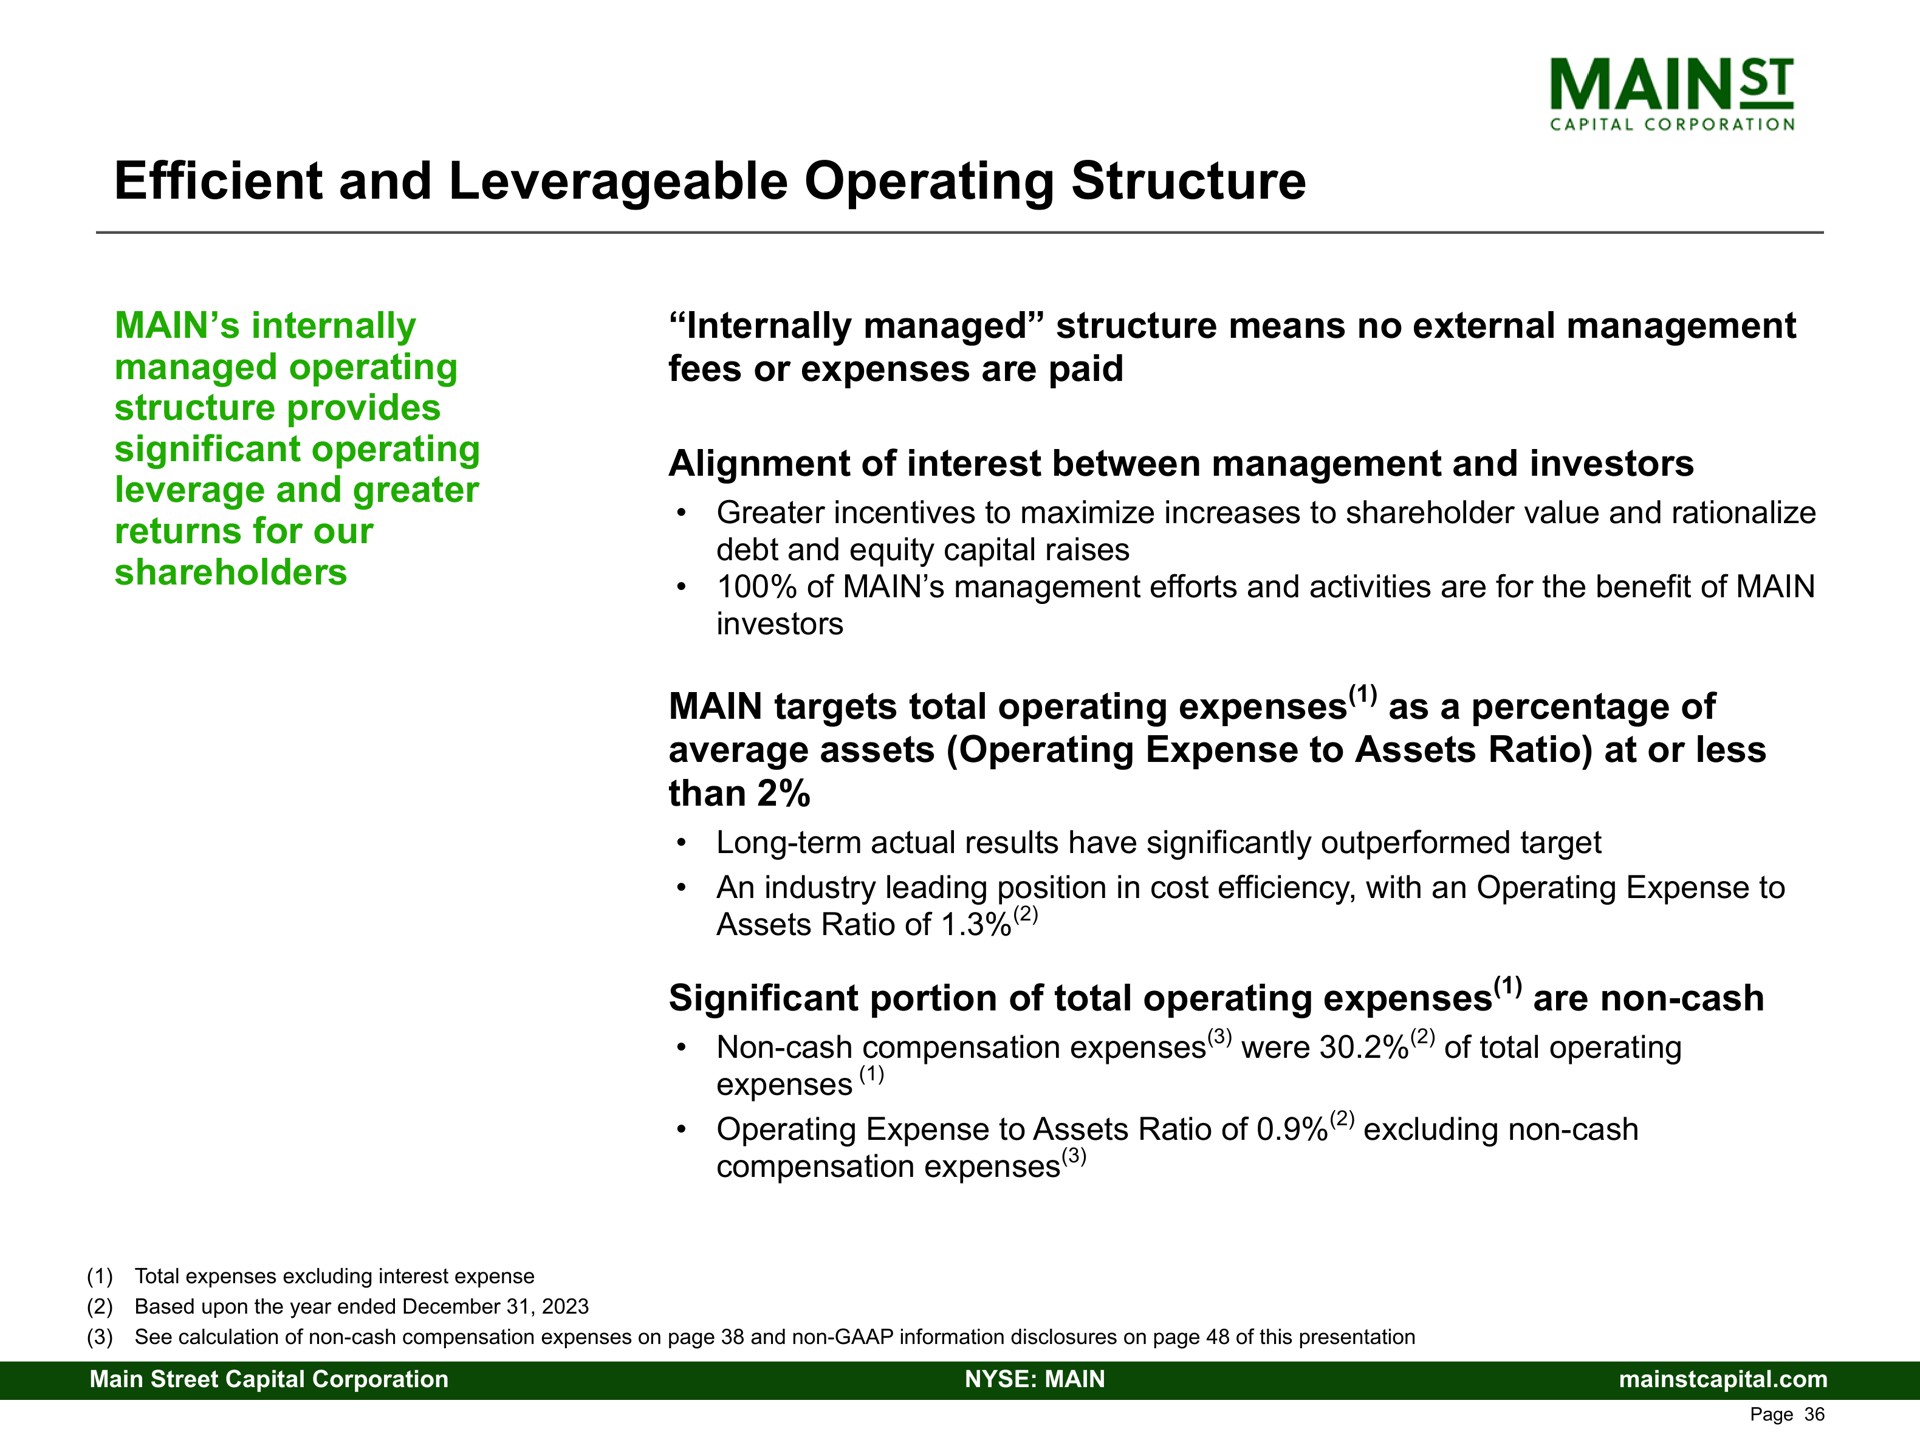 efficient and operating structure significant alignment of interest between management investors main targets total expenses as a percentage of significant portion of total expenses are non cash | Main Street Capital